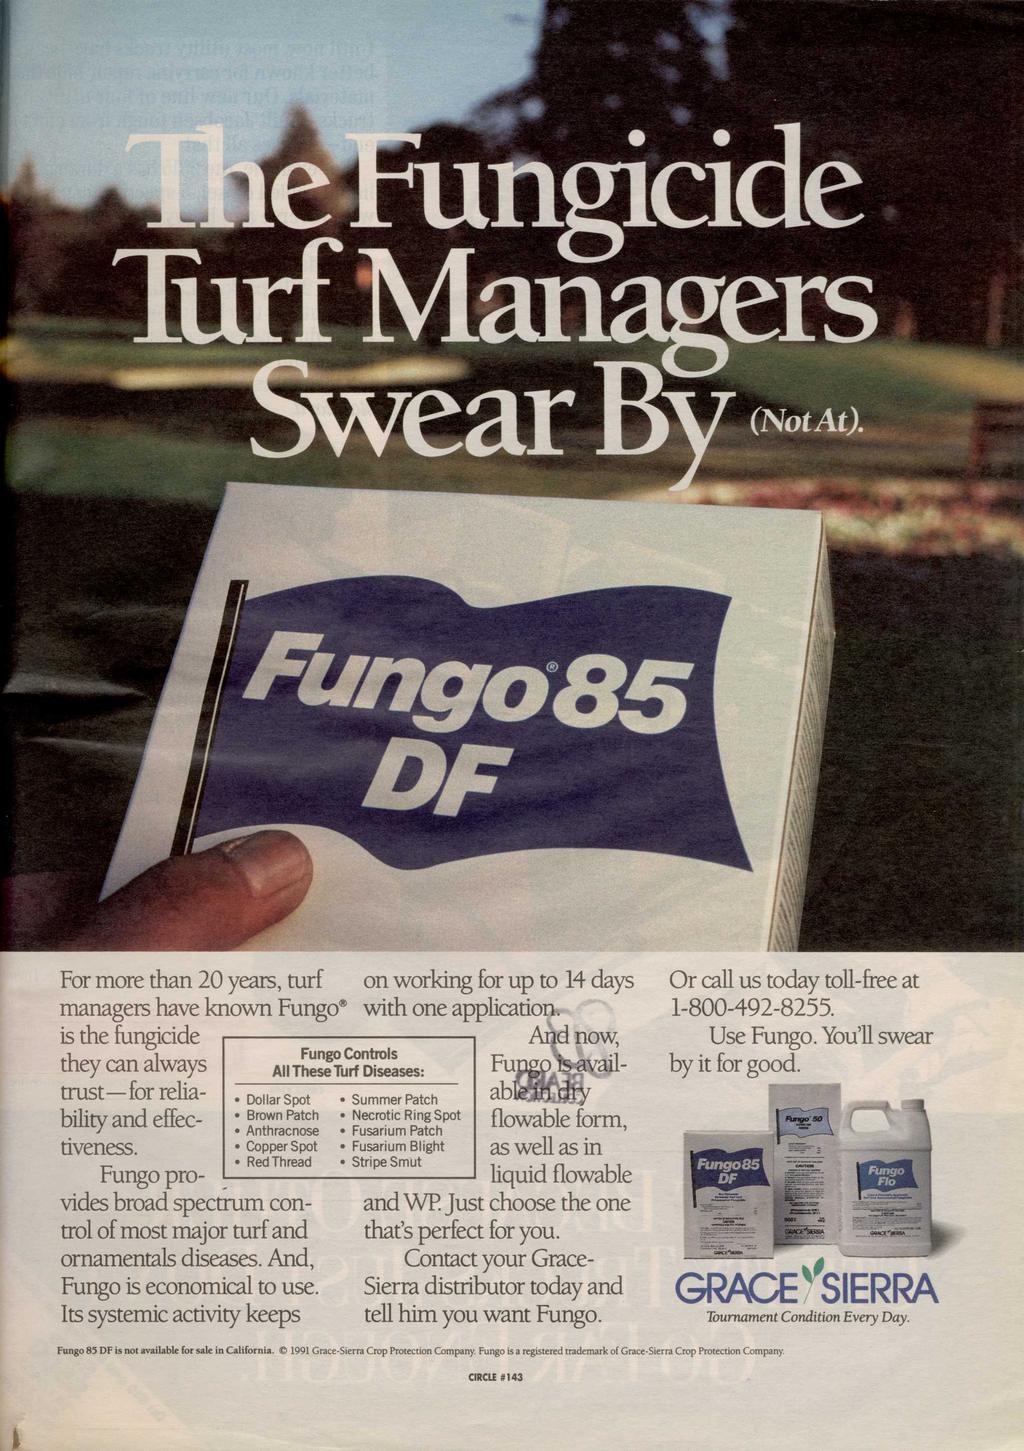 For more than 20 years, turf on working for up to 14 days managers have known Fungo with one application.